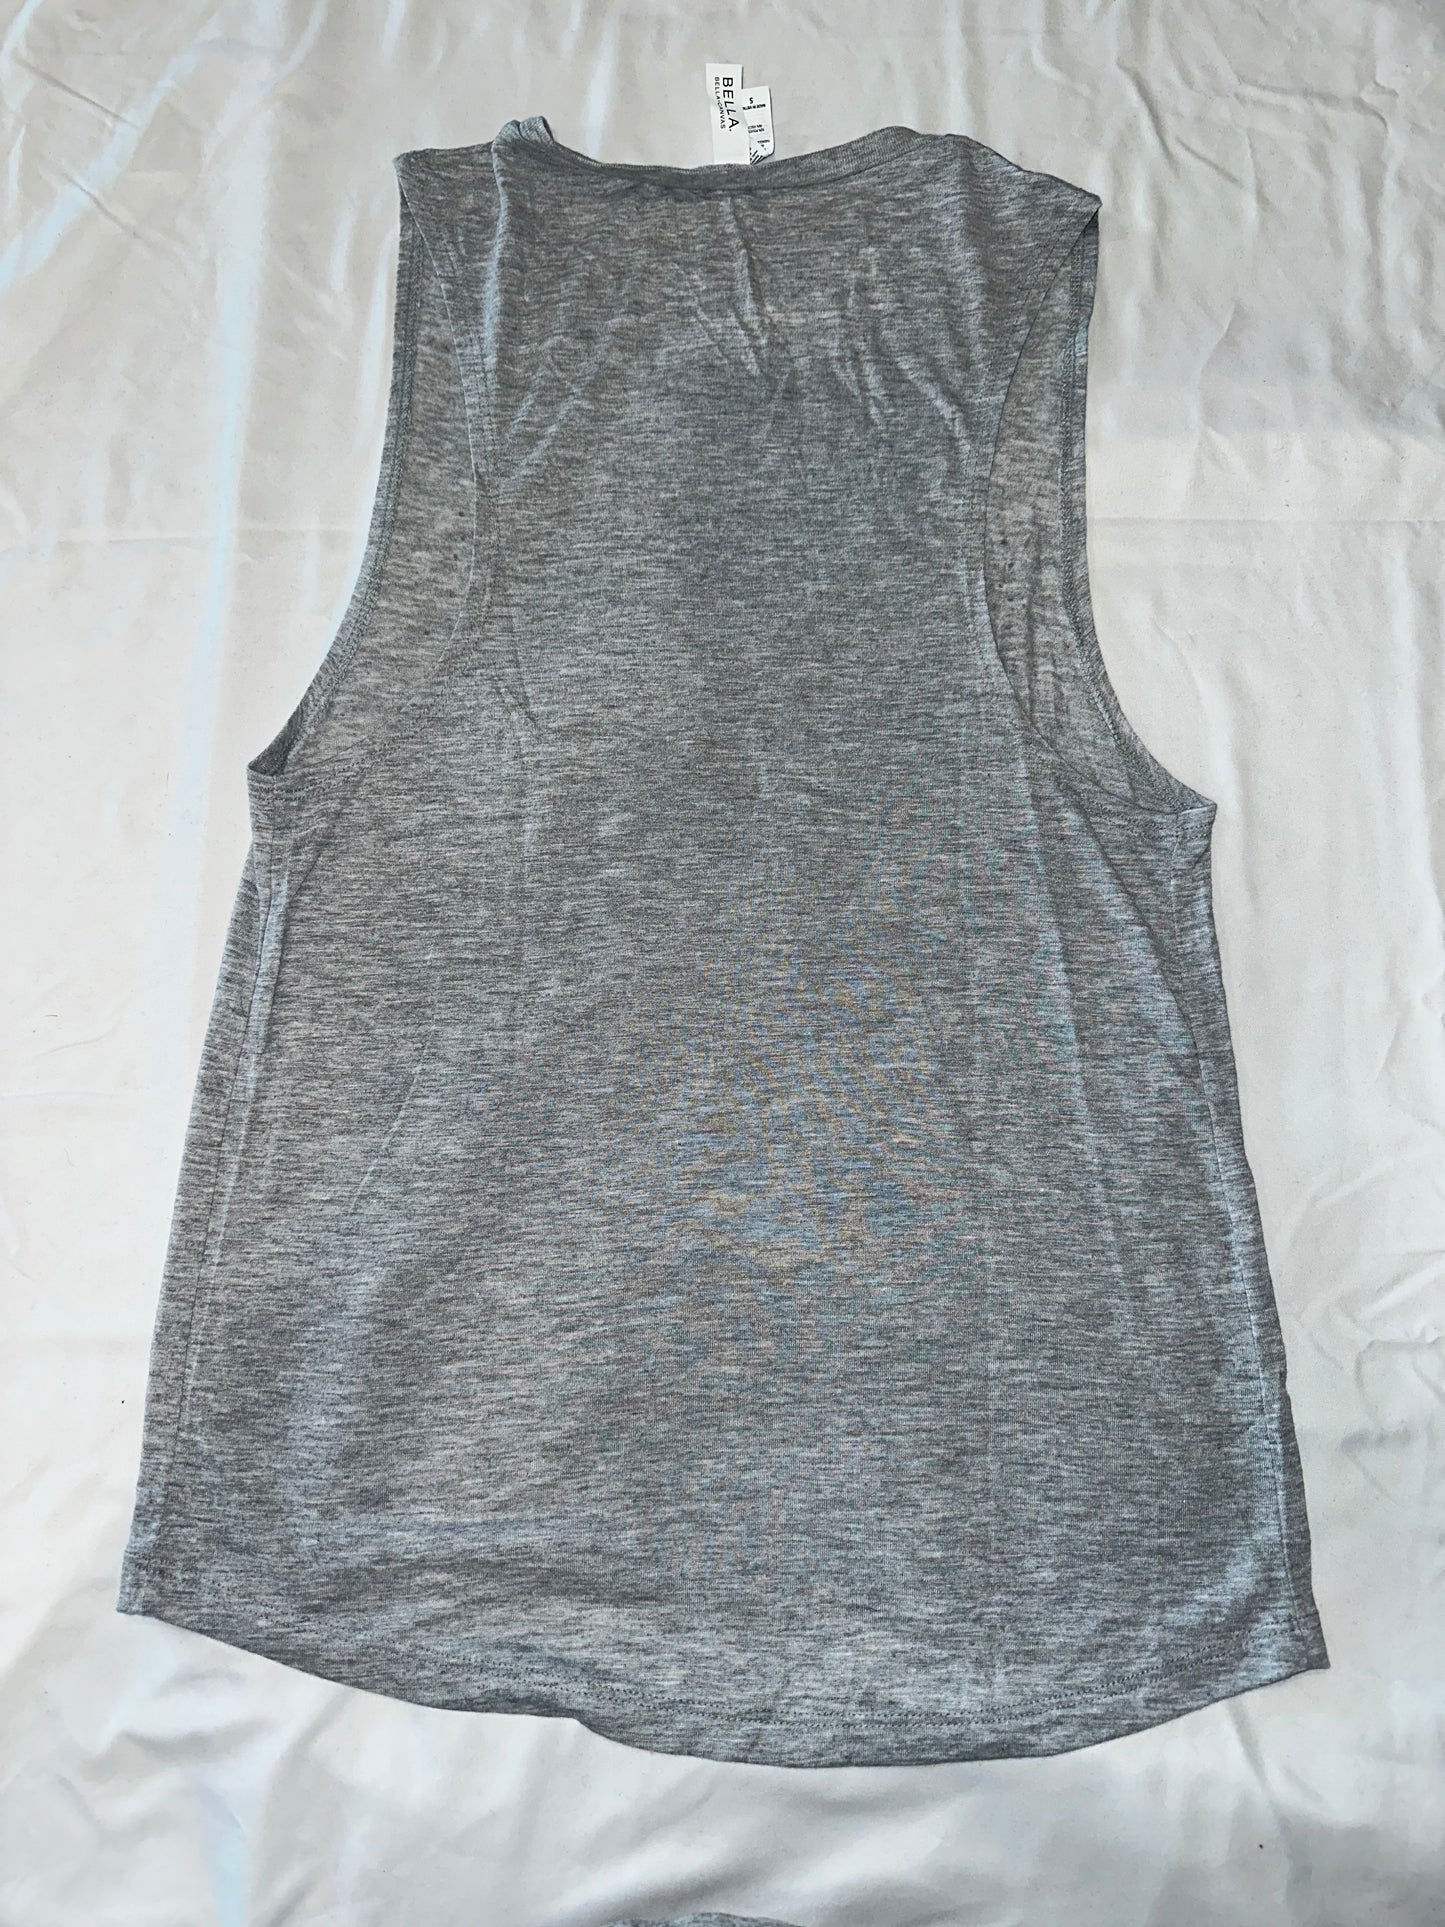 Grey Muscle Tank Top with Black Bling Design